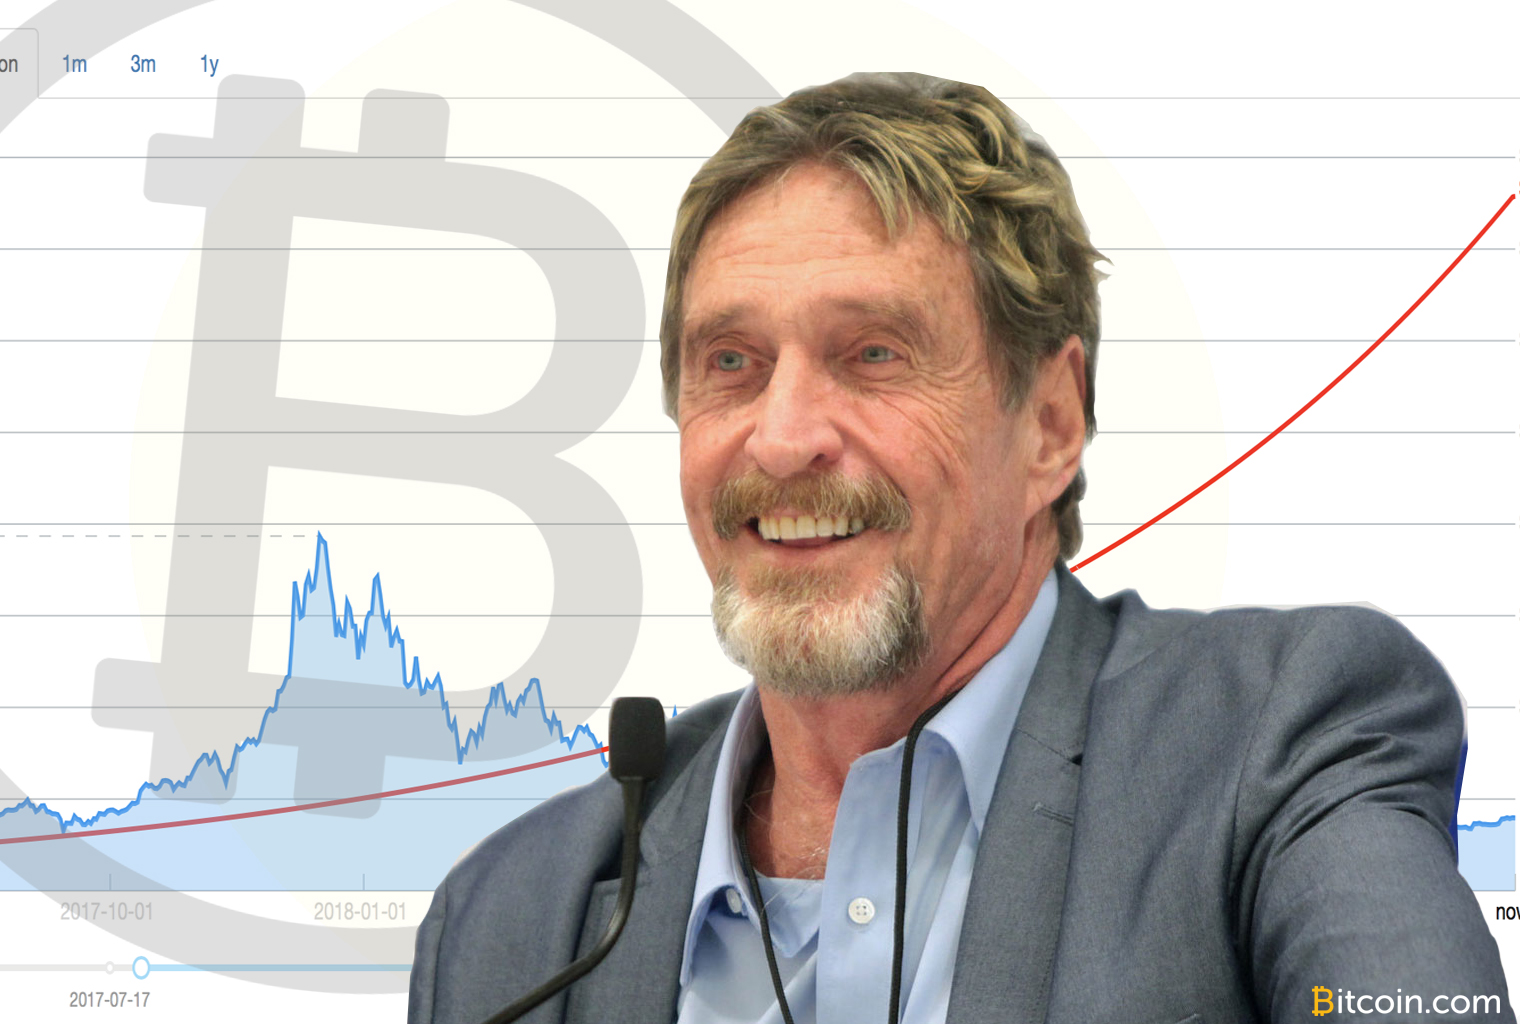 The Infamous Bet: John McAfee's 2020 Price Target Shows BTC Undervalued by $37K